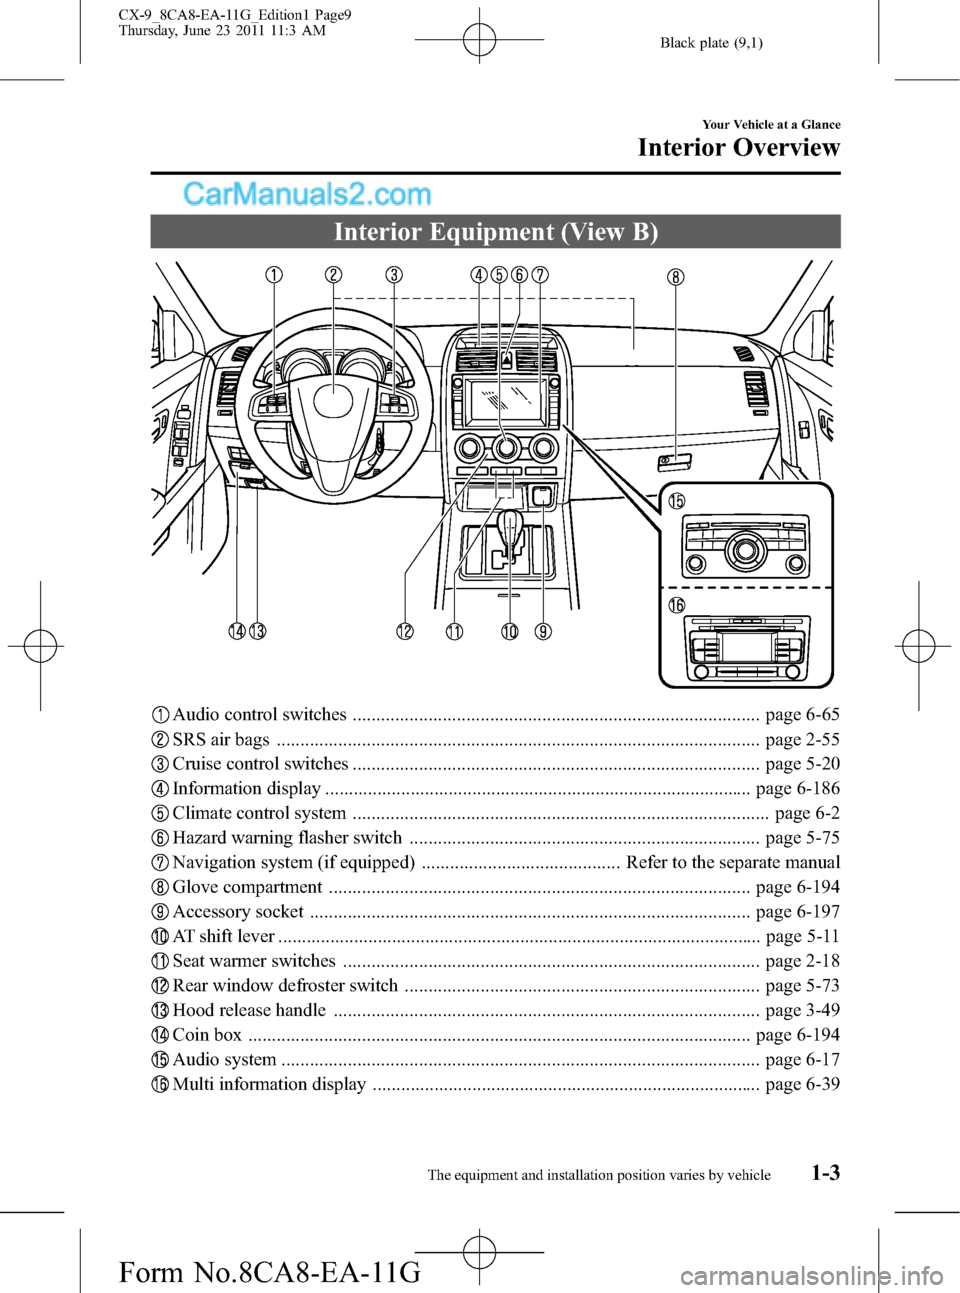 MAZDA MODEL CX-9 2012  Owners Manual (in English) Black plate (9,1)
Interior Equipment (View B)
Audio control switches ...................................................................................... page 6-65
SRS air bags .....................